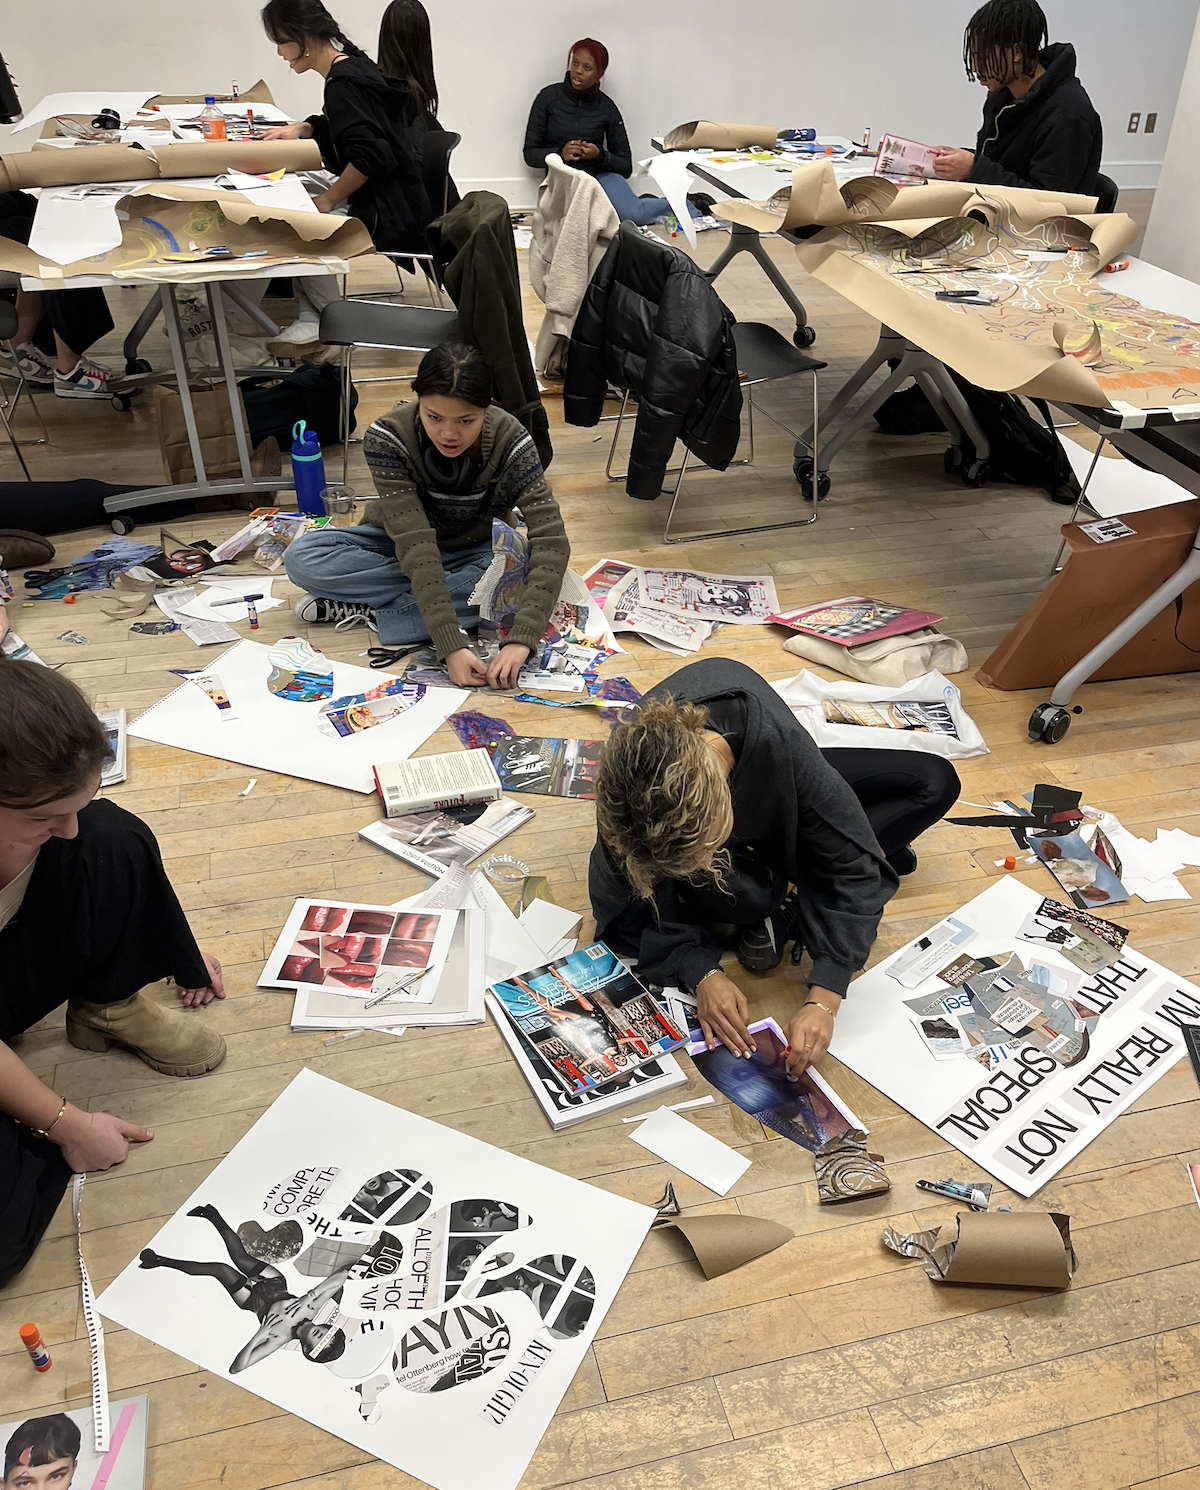 A group of students working on collage projects with cut paper